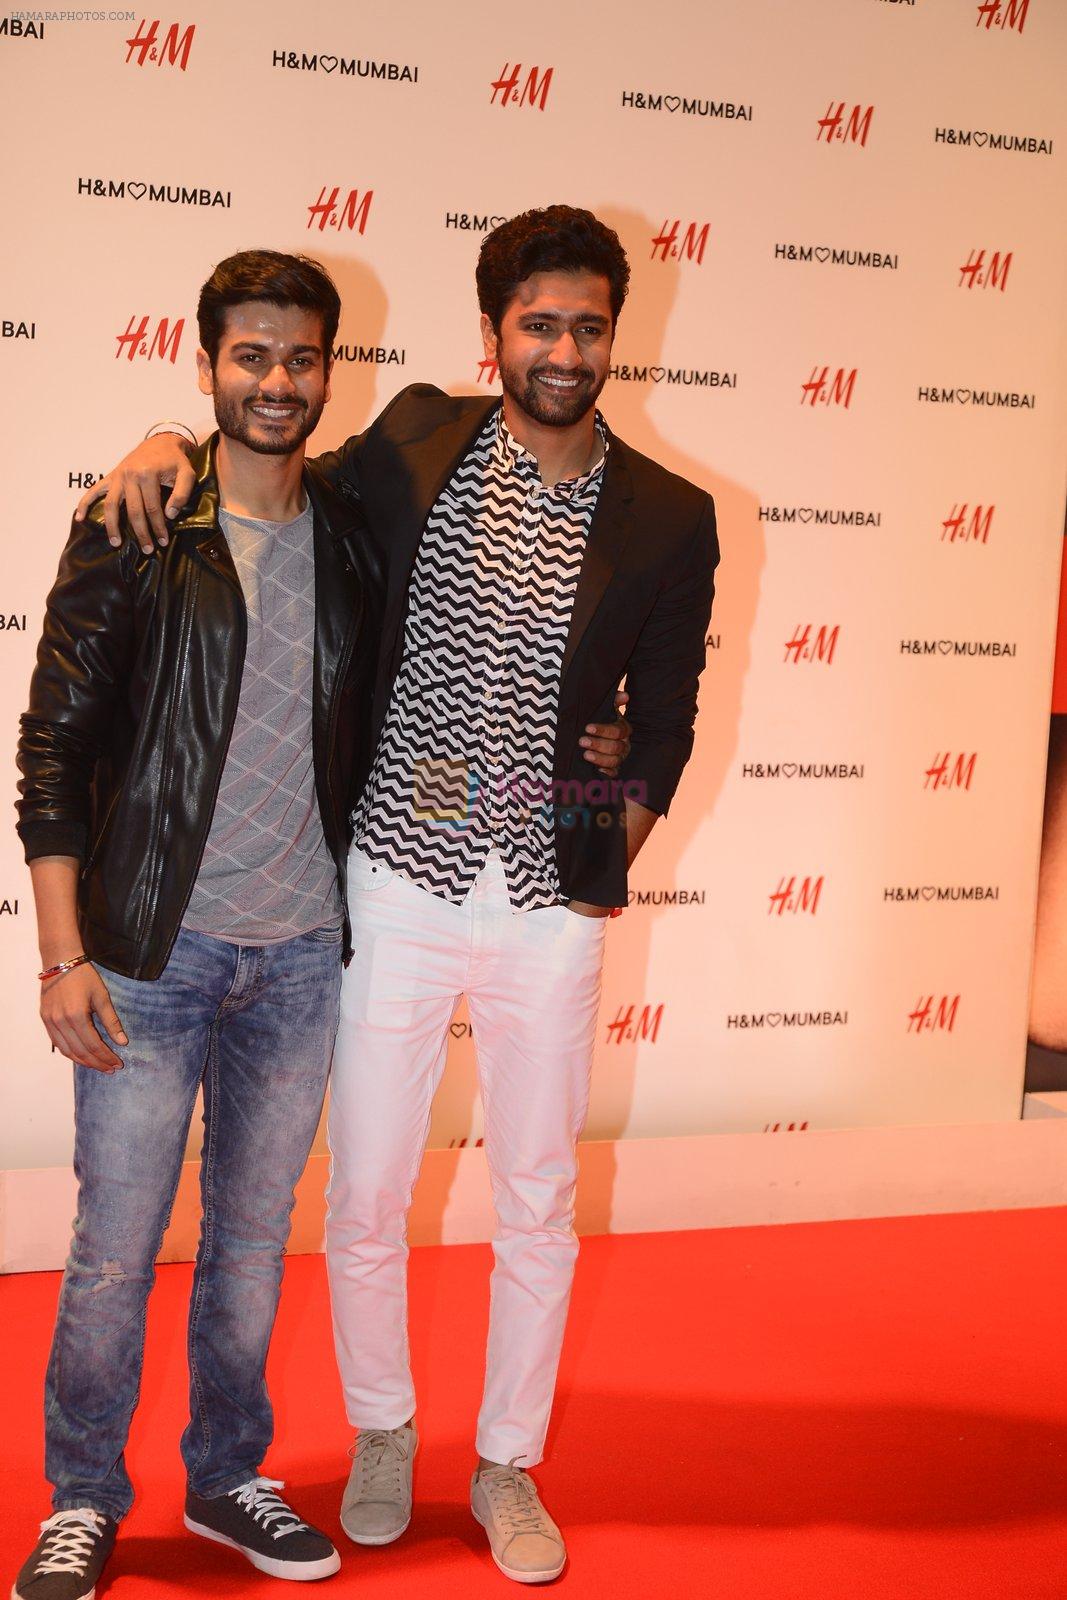 Vicky Kaushal at h&m mubai launch on 11th Aug 2016